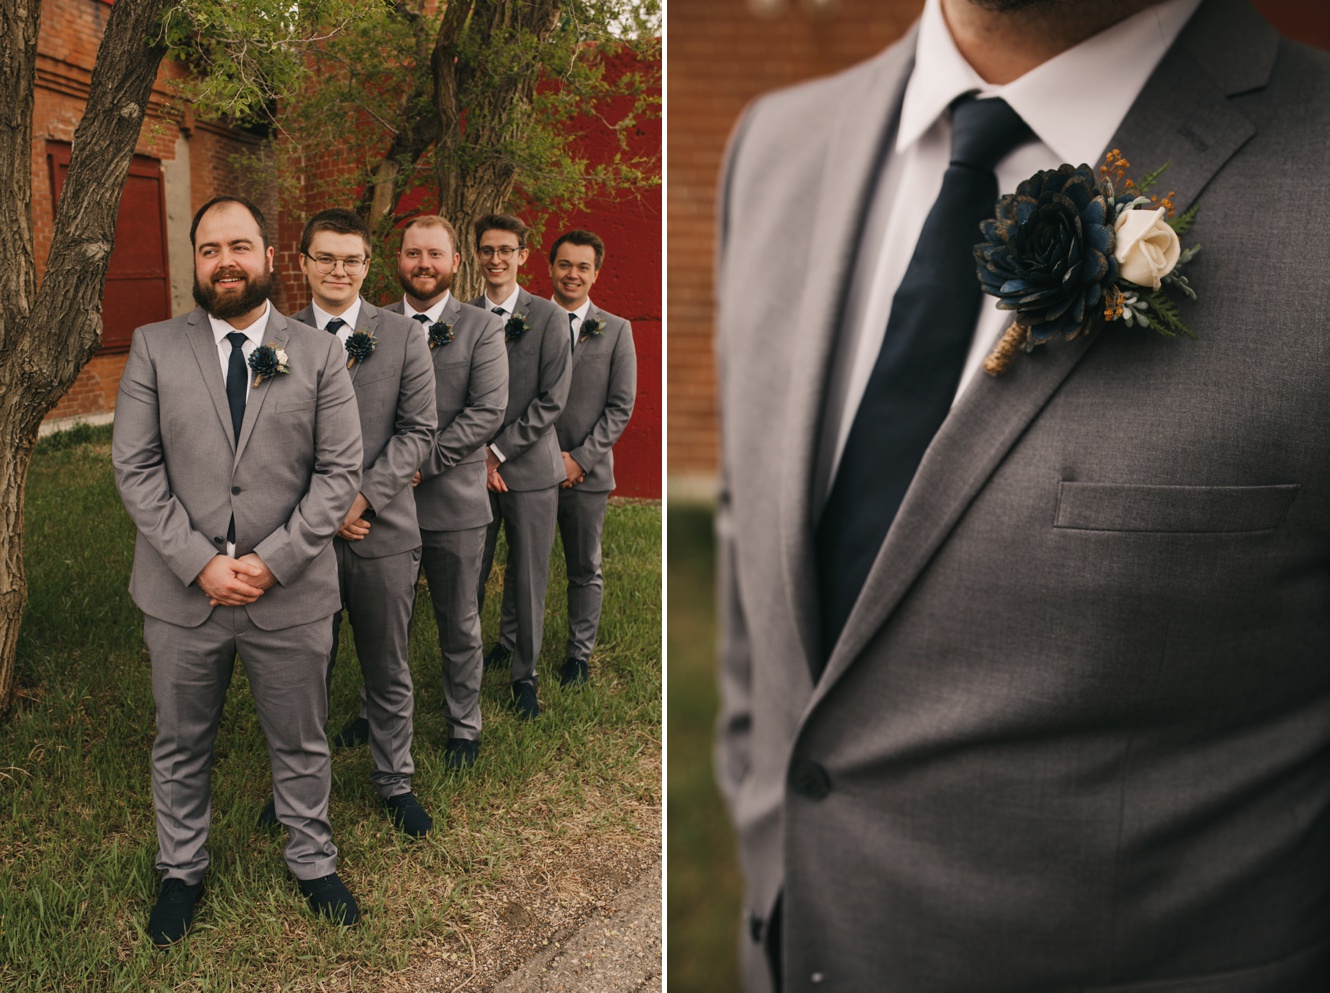 Spring groomsmen outfit ideas